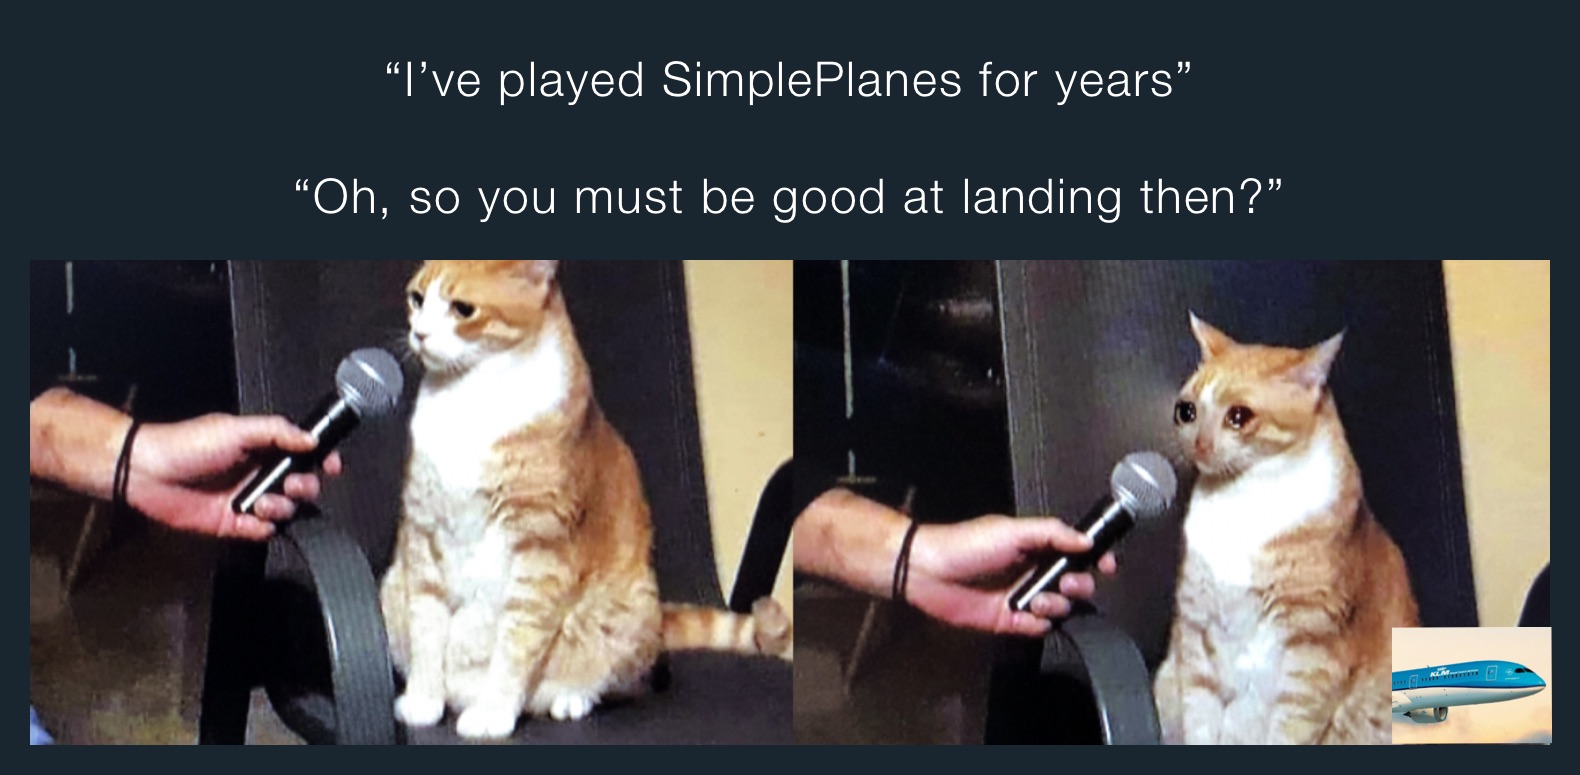 “I’ve played SimplePlanes for years”

“Oh, so you must be good at landing then?”